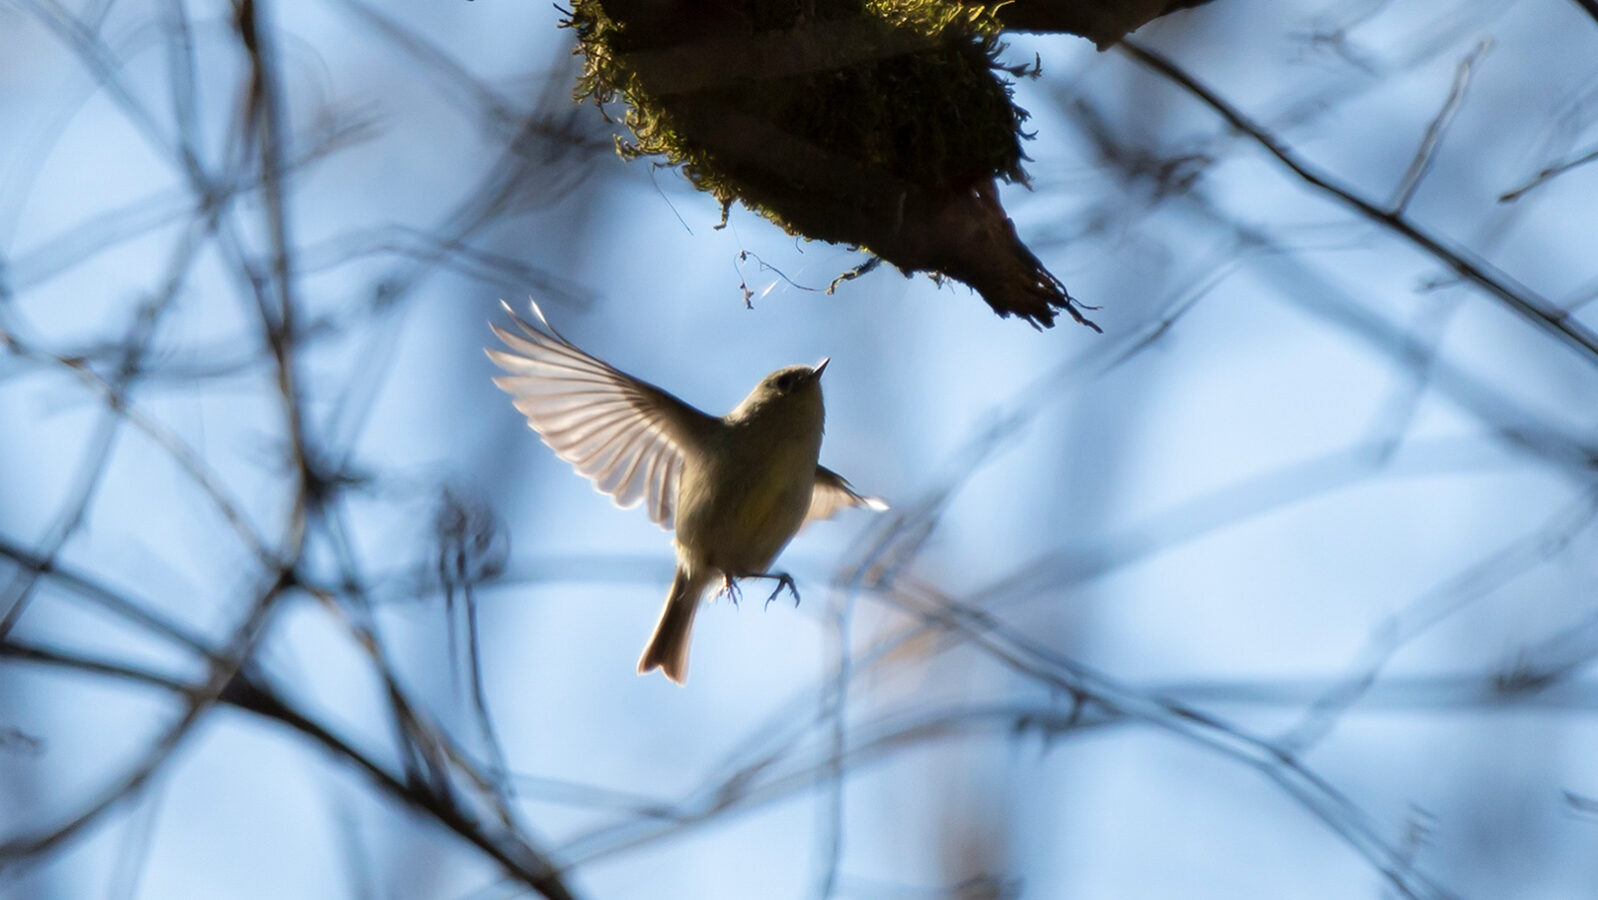 Ruby-crowned kinglet taking off